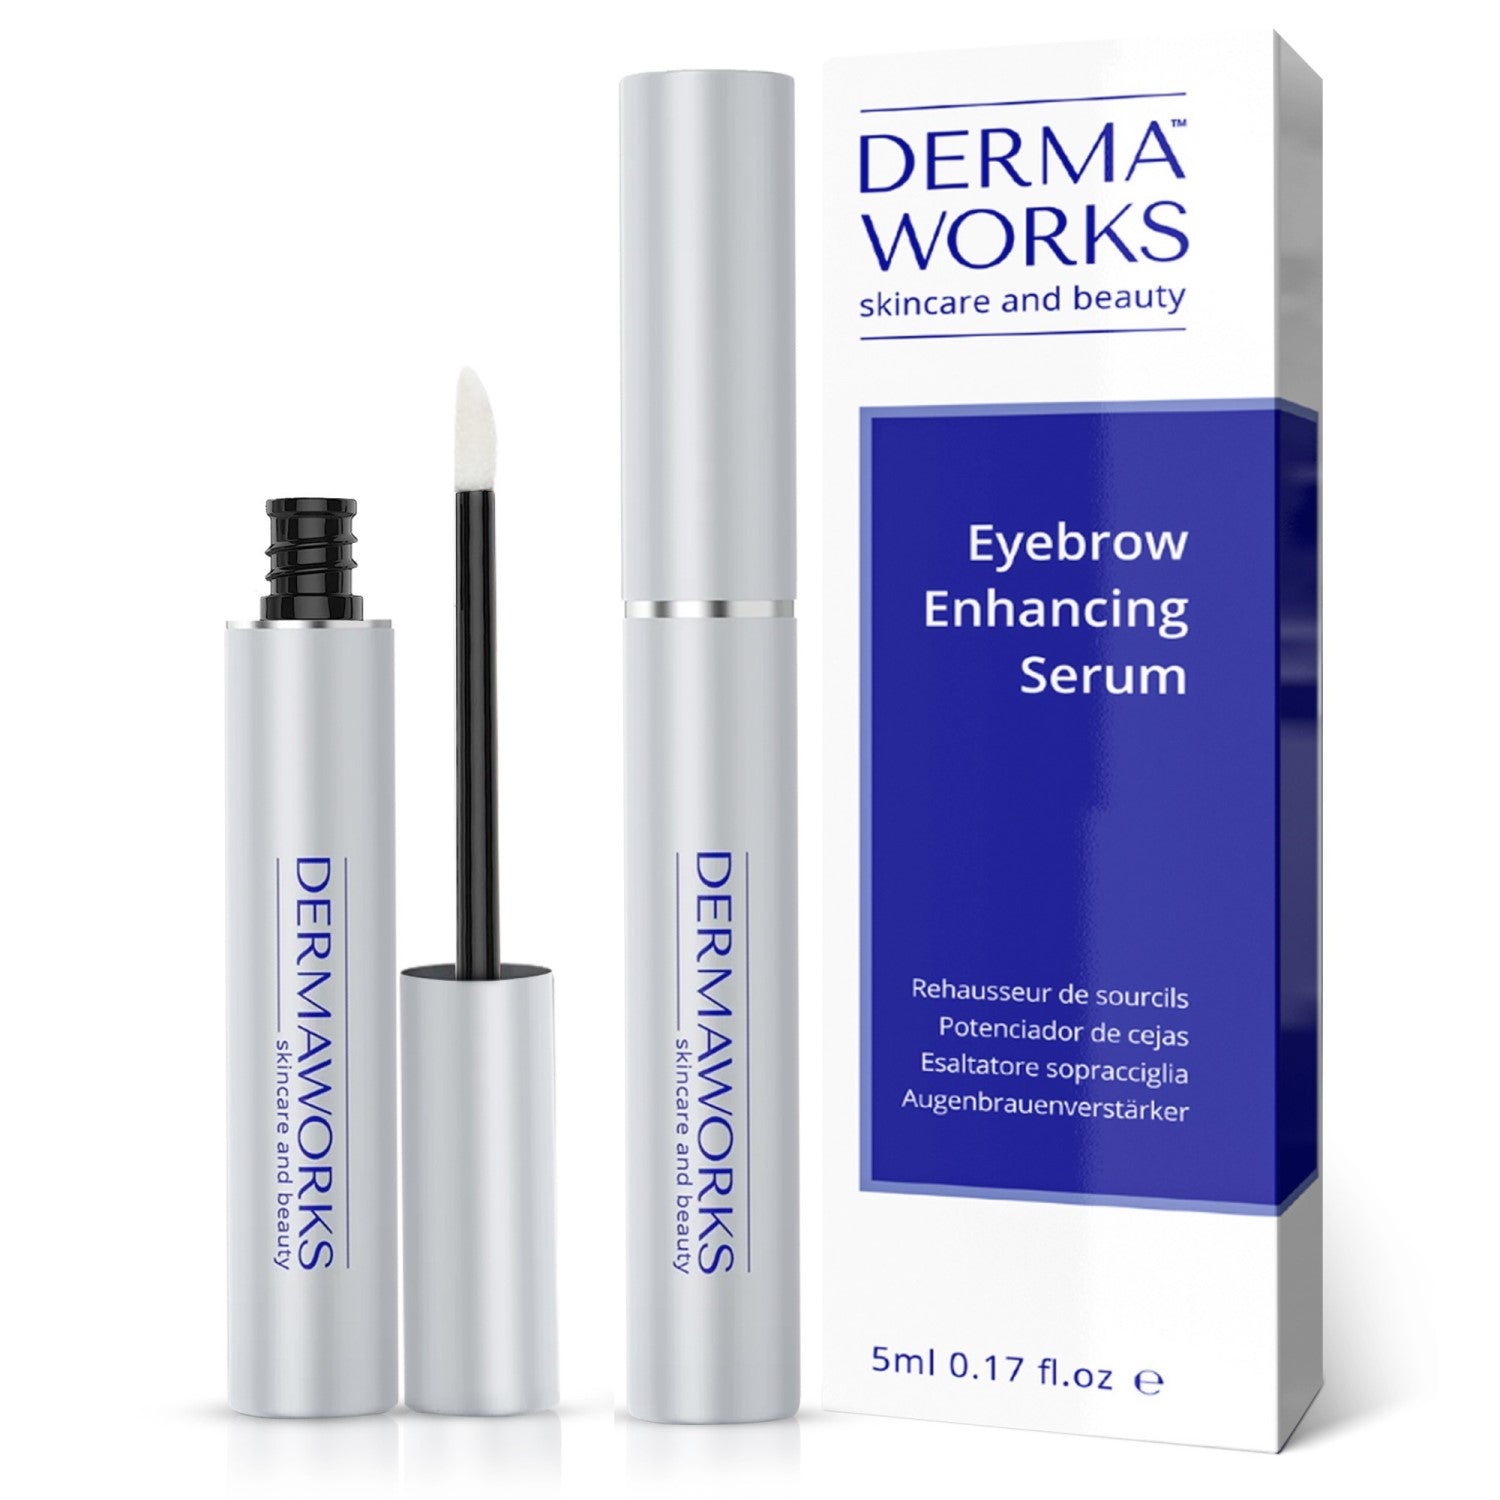 Dermaworks eyebrow growth serum. Grow fuller, thicker and more shapely eyebrows in 60 days. 